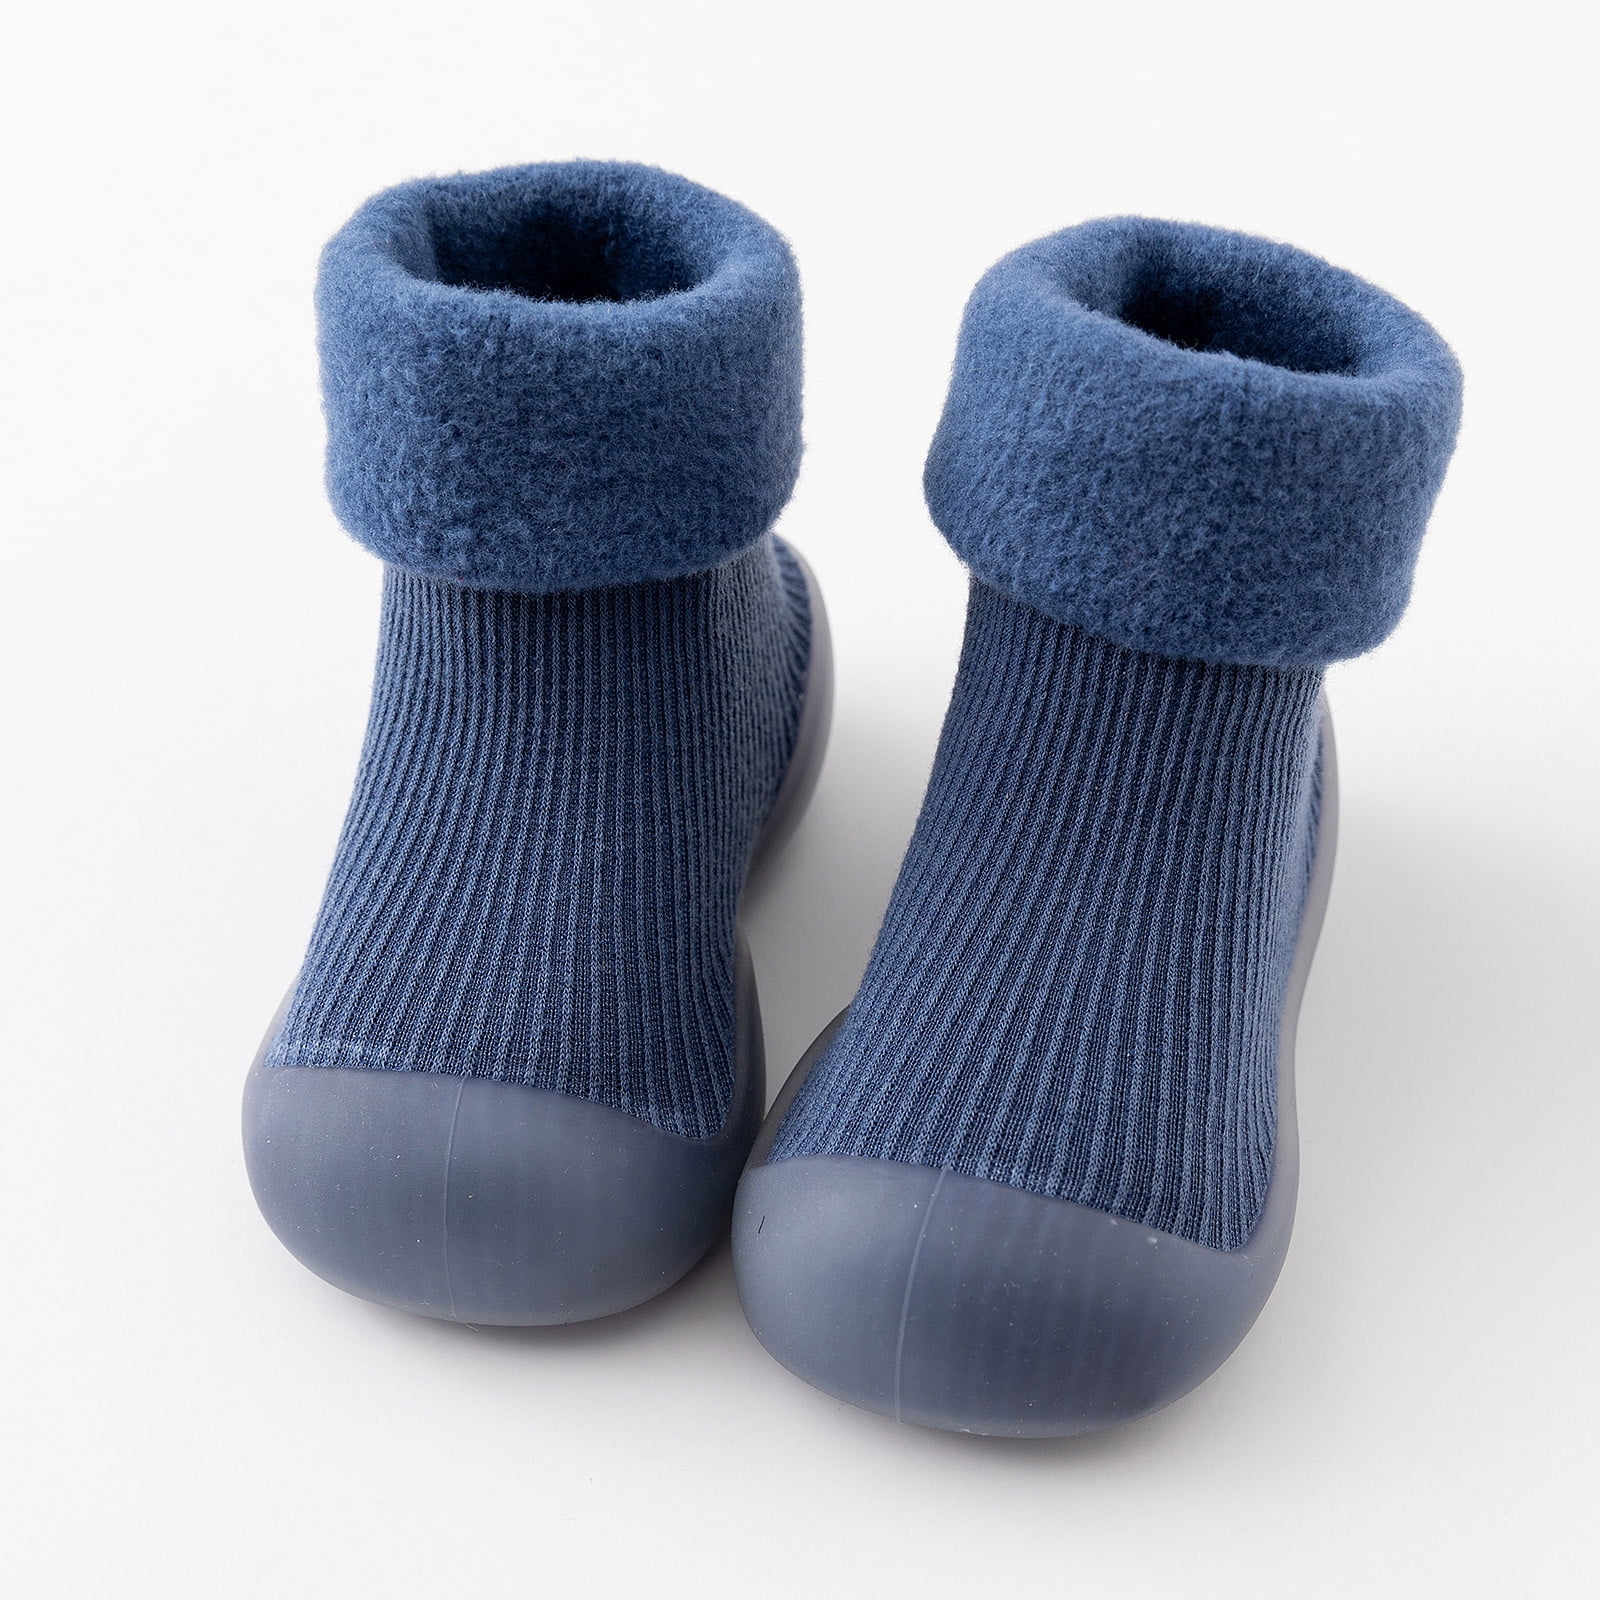 【FZM】Shoes For Kids Kids Toddler Baby Boys Girls Solid Warm Knit Soft ...